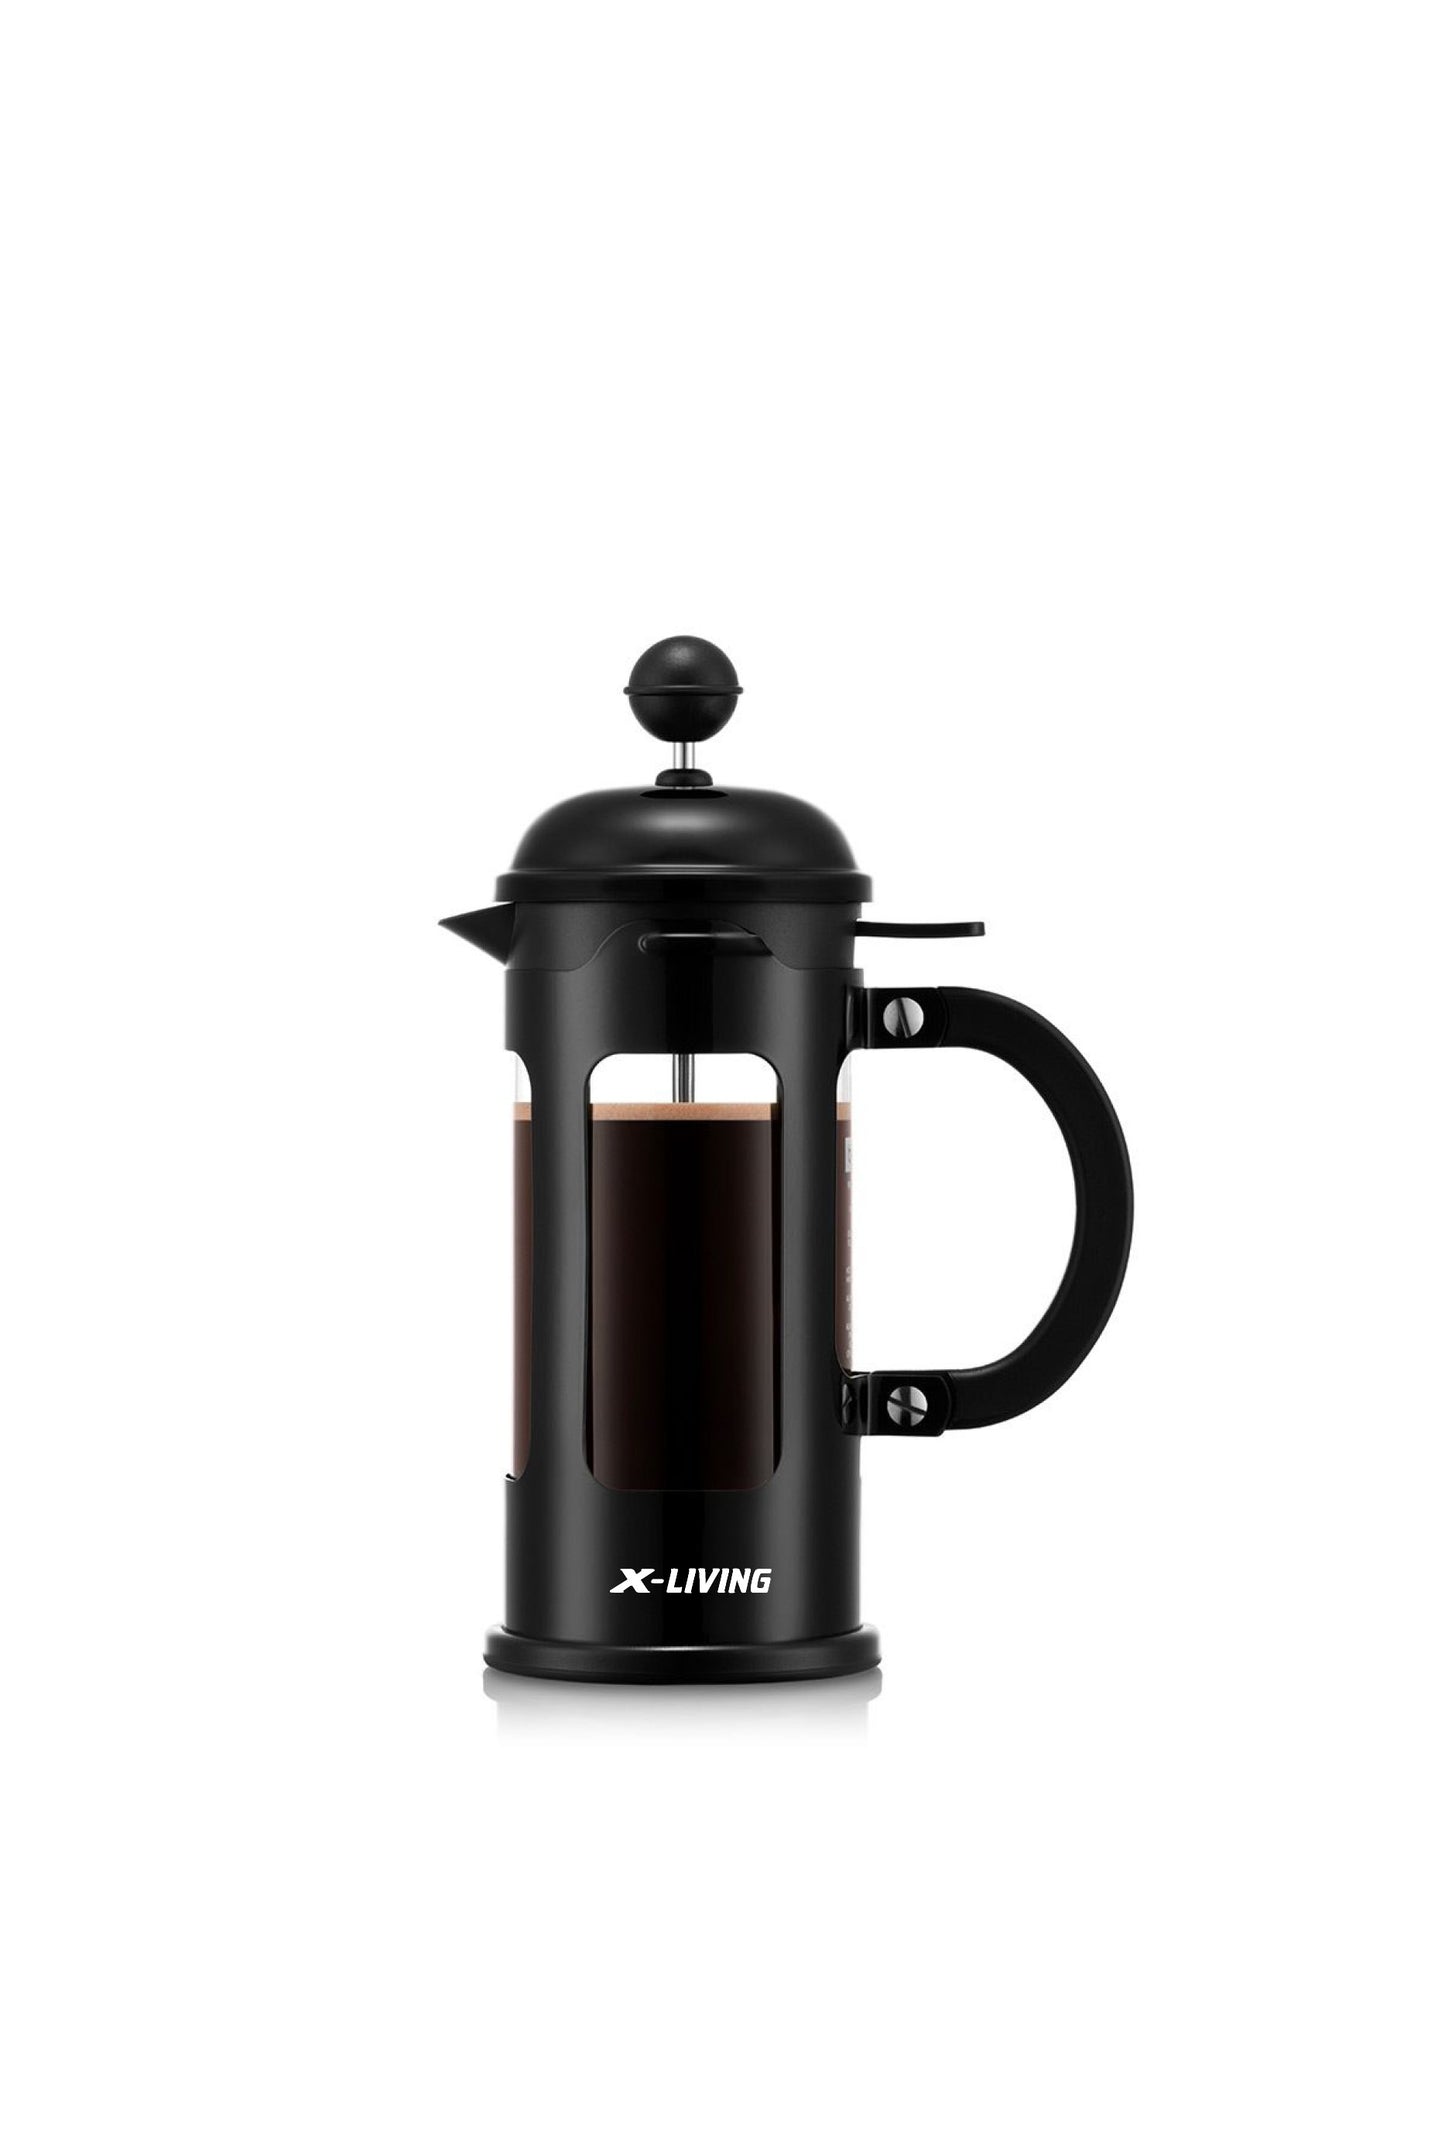 CHAMBORD French Press coffee maker - Black (3 cup)